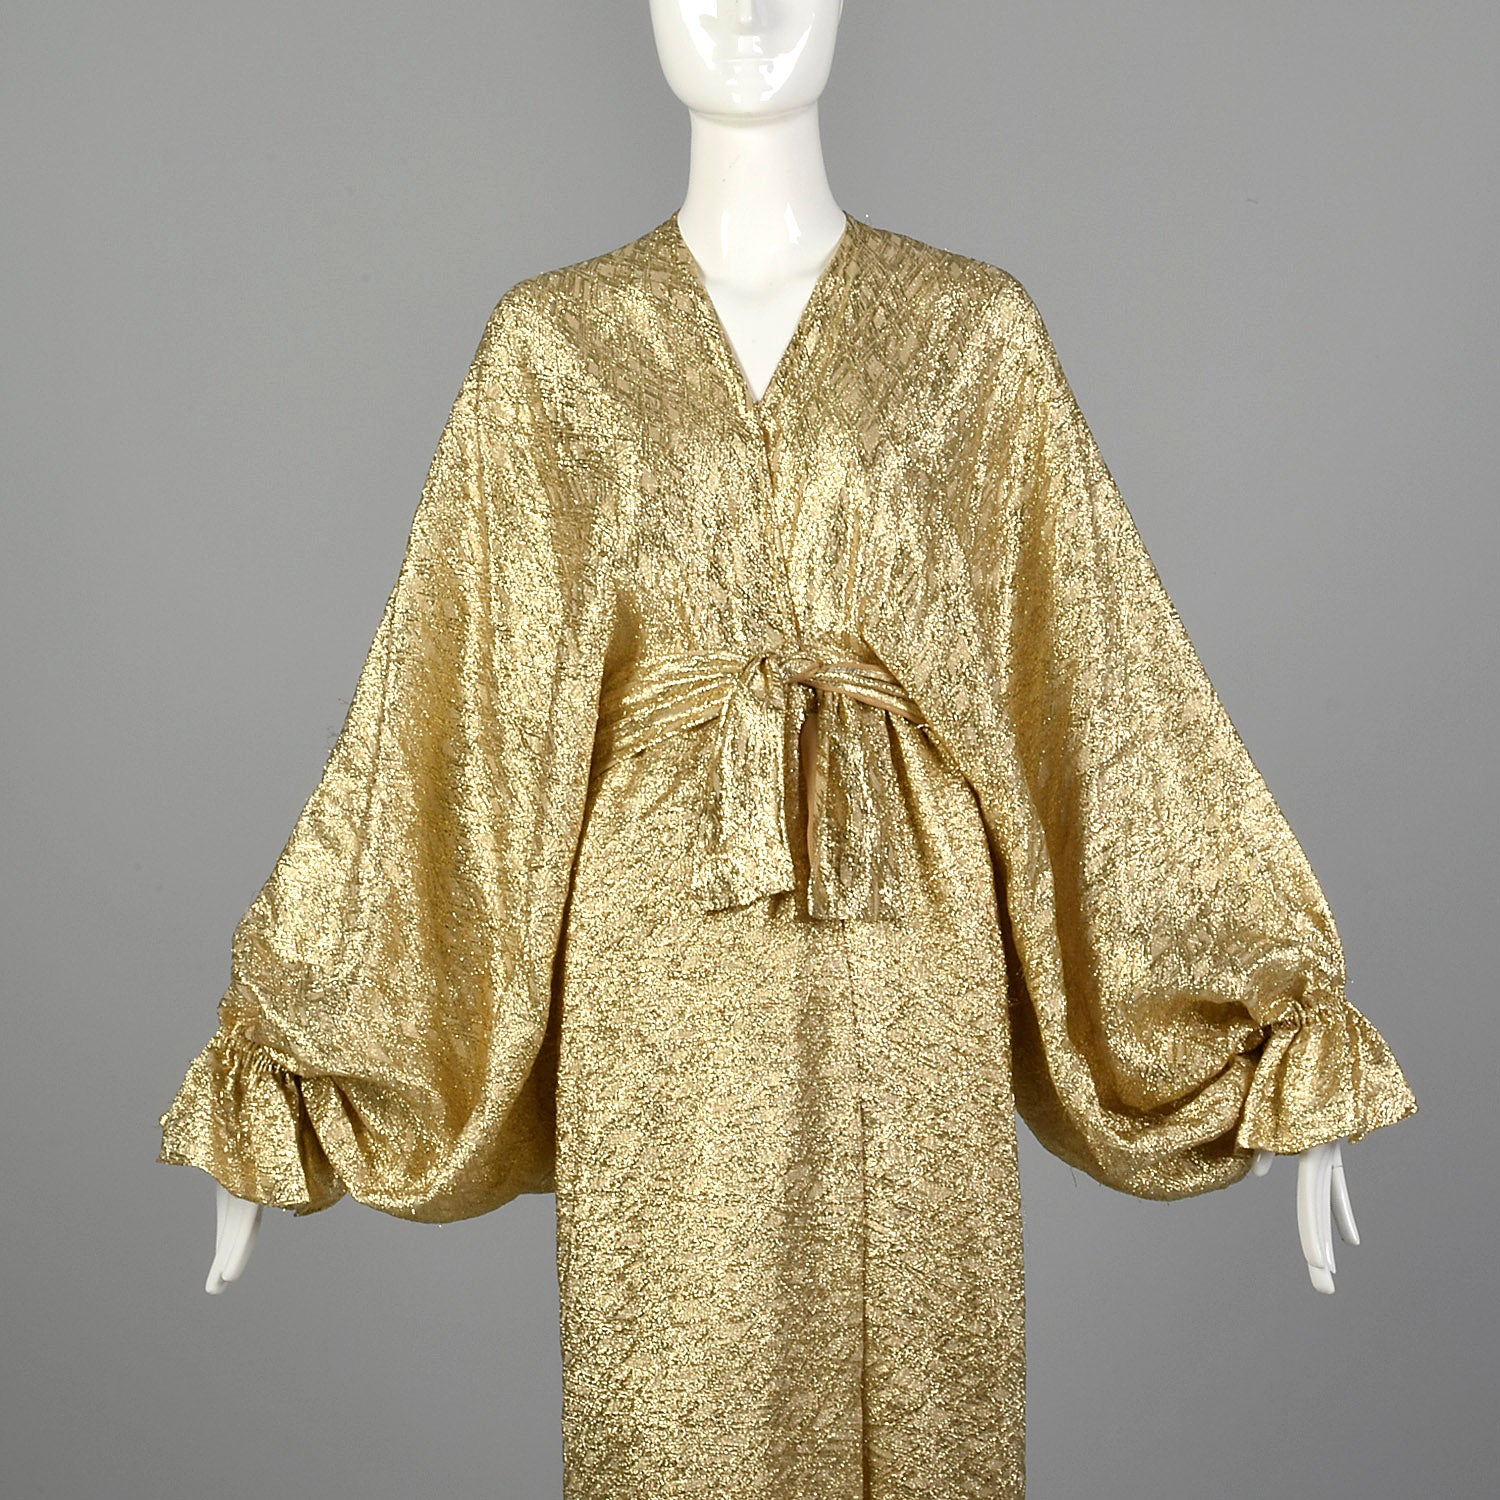 1970s Metallic Gold Evening Dress with Balloon Sleeves